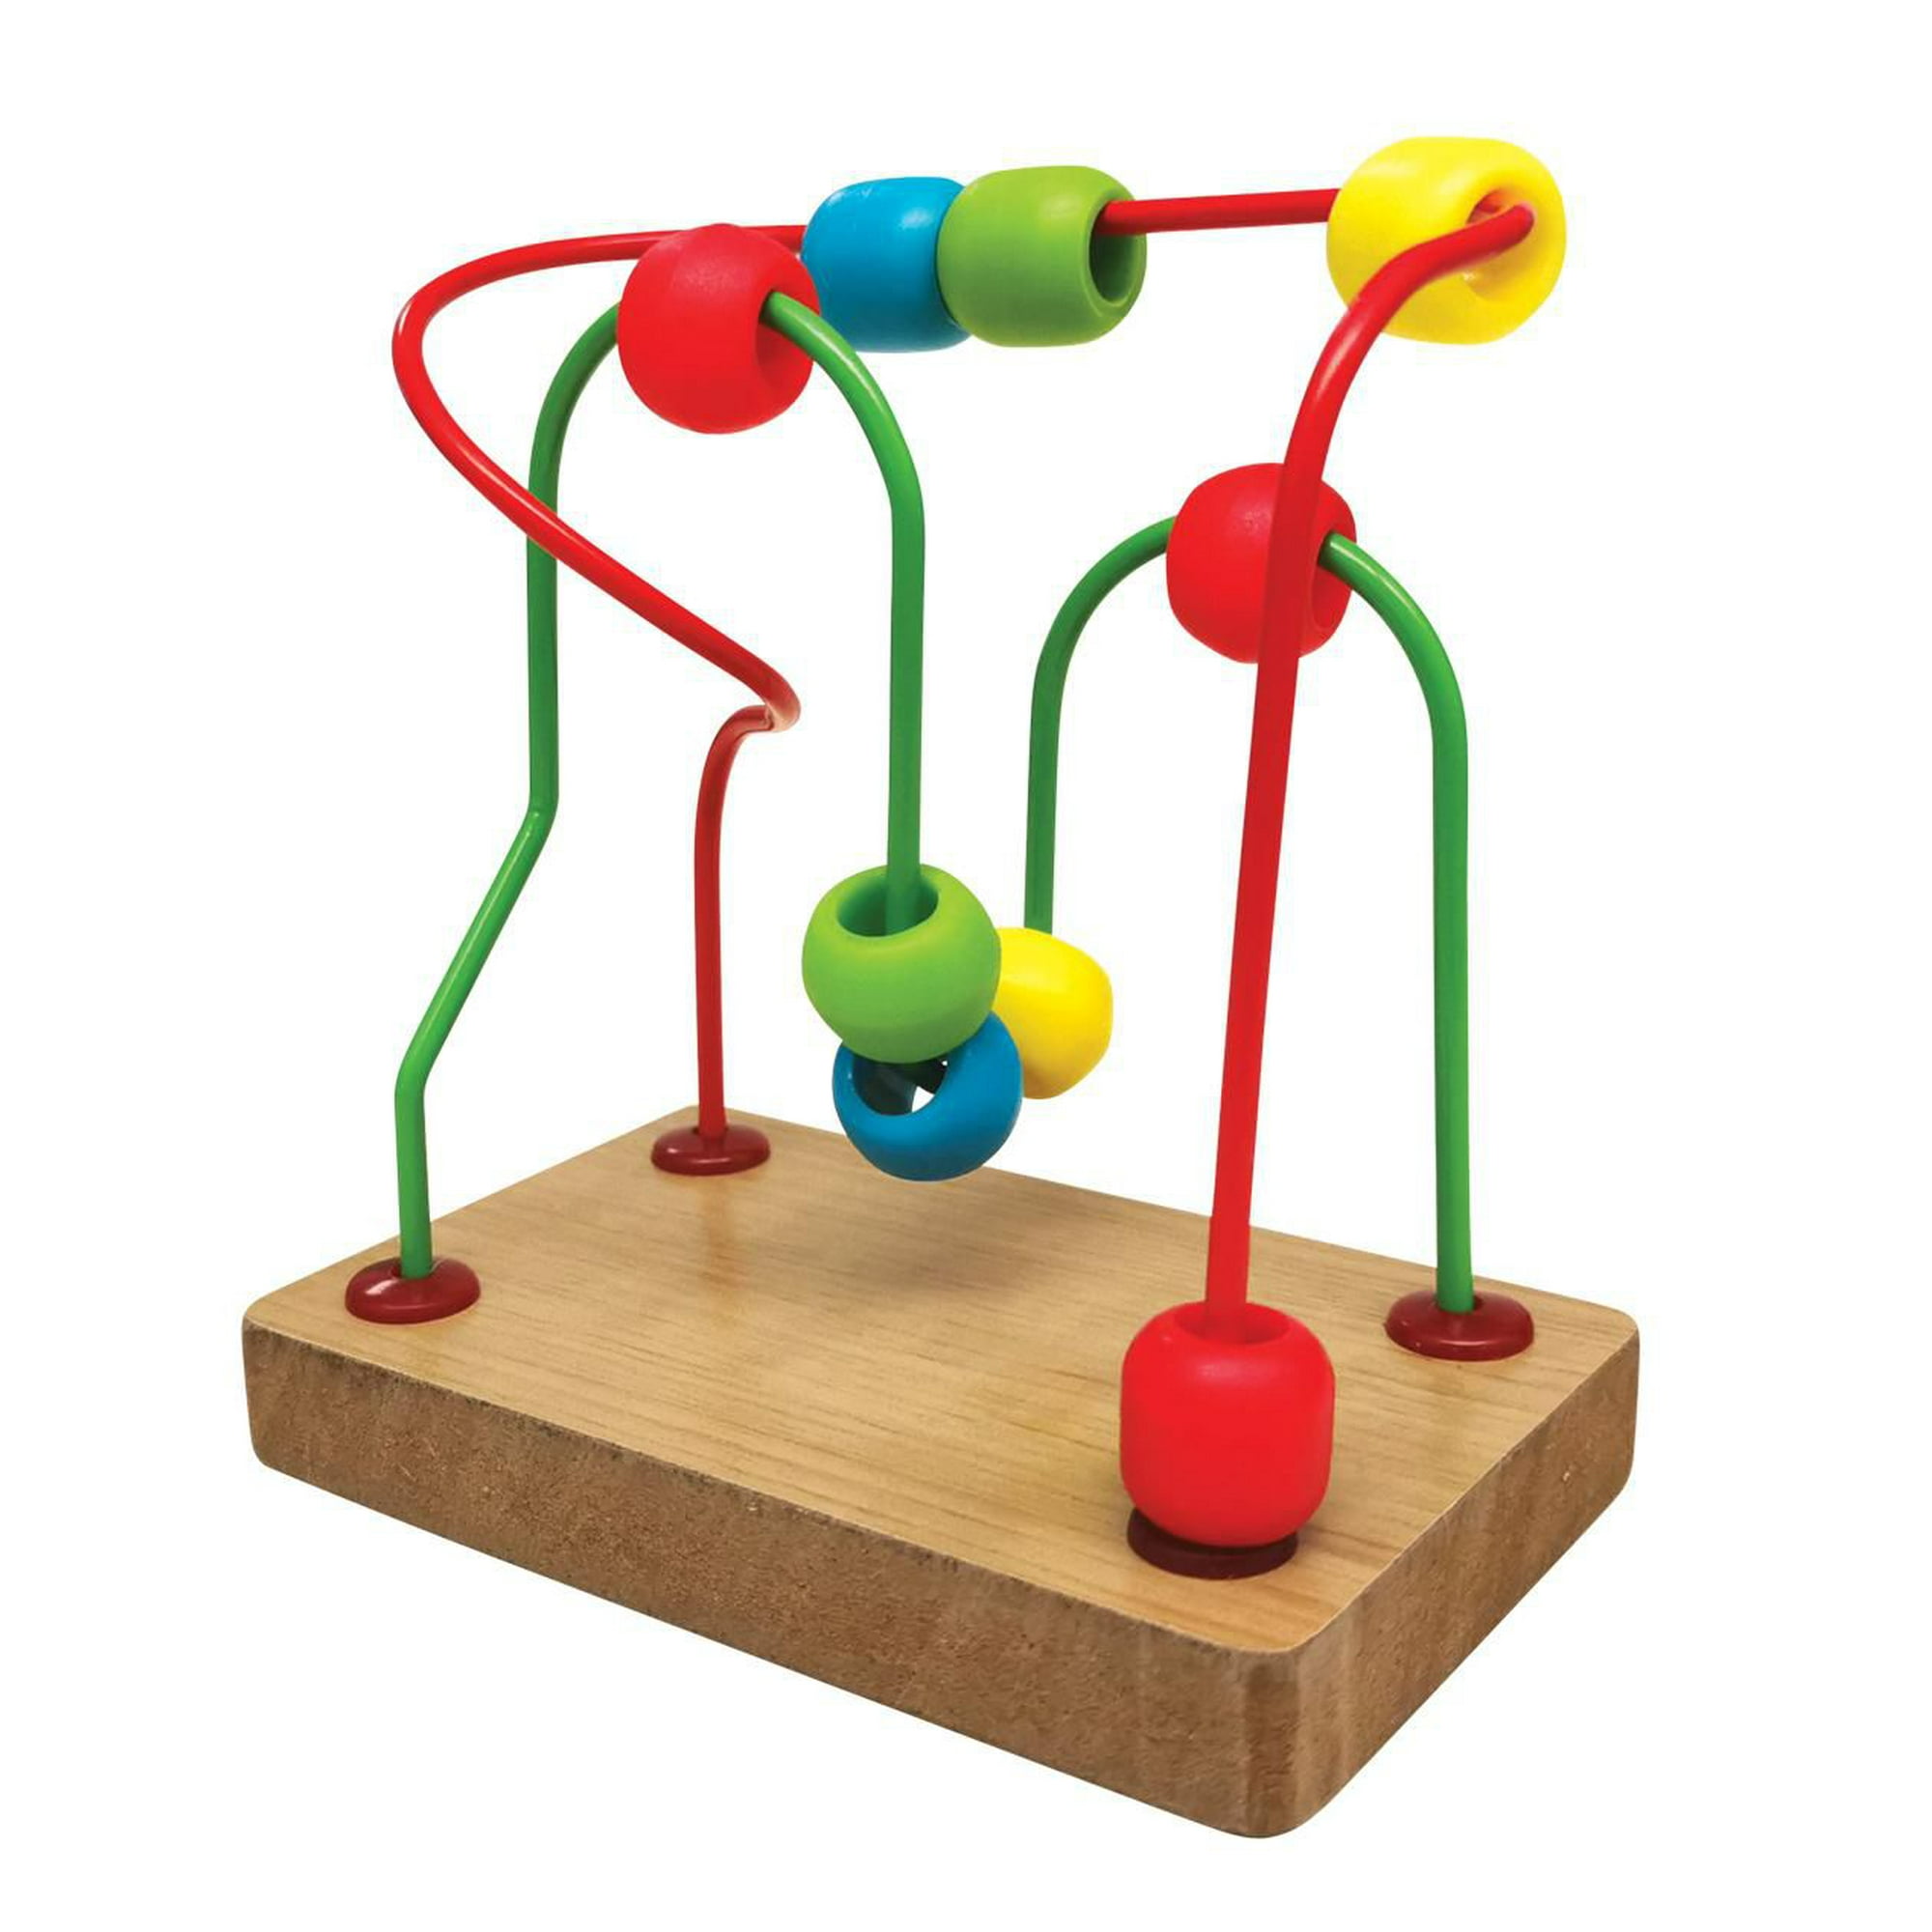 Children's Mons Educational Wooden Toys, Digital Color Matching